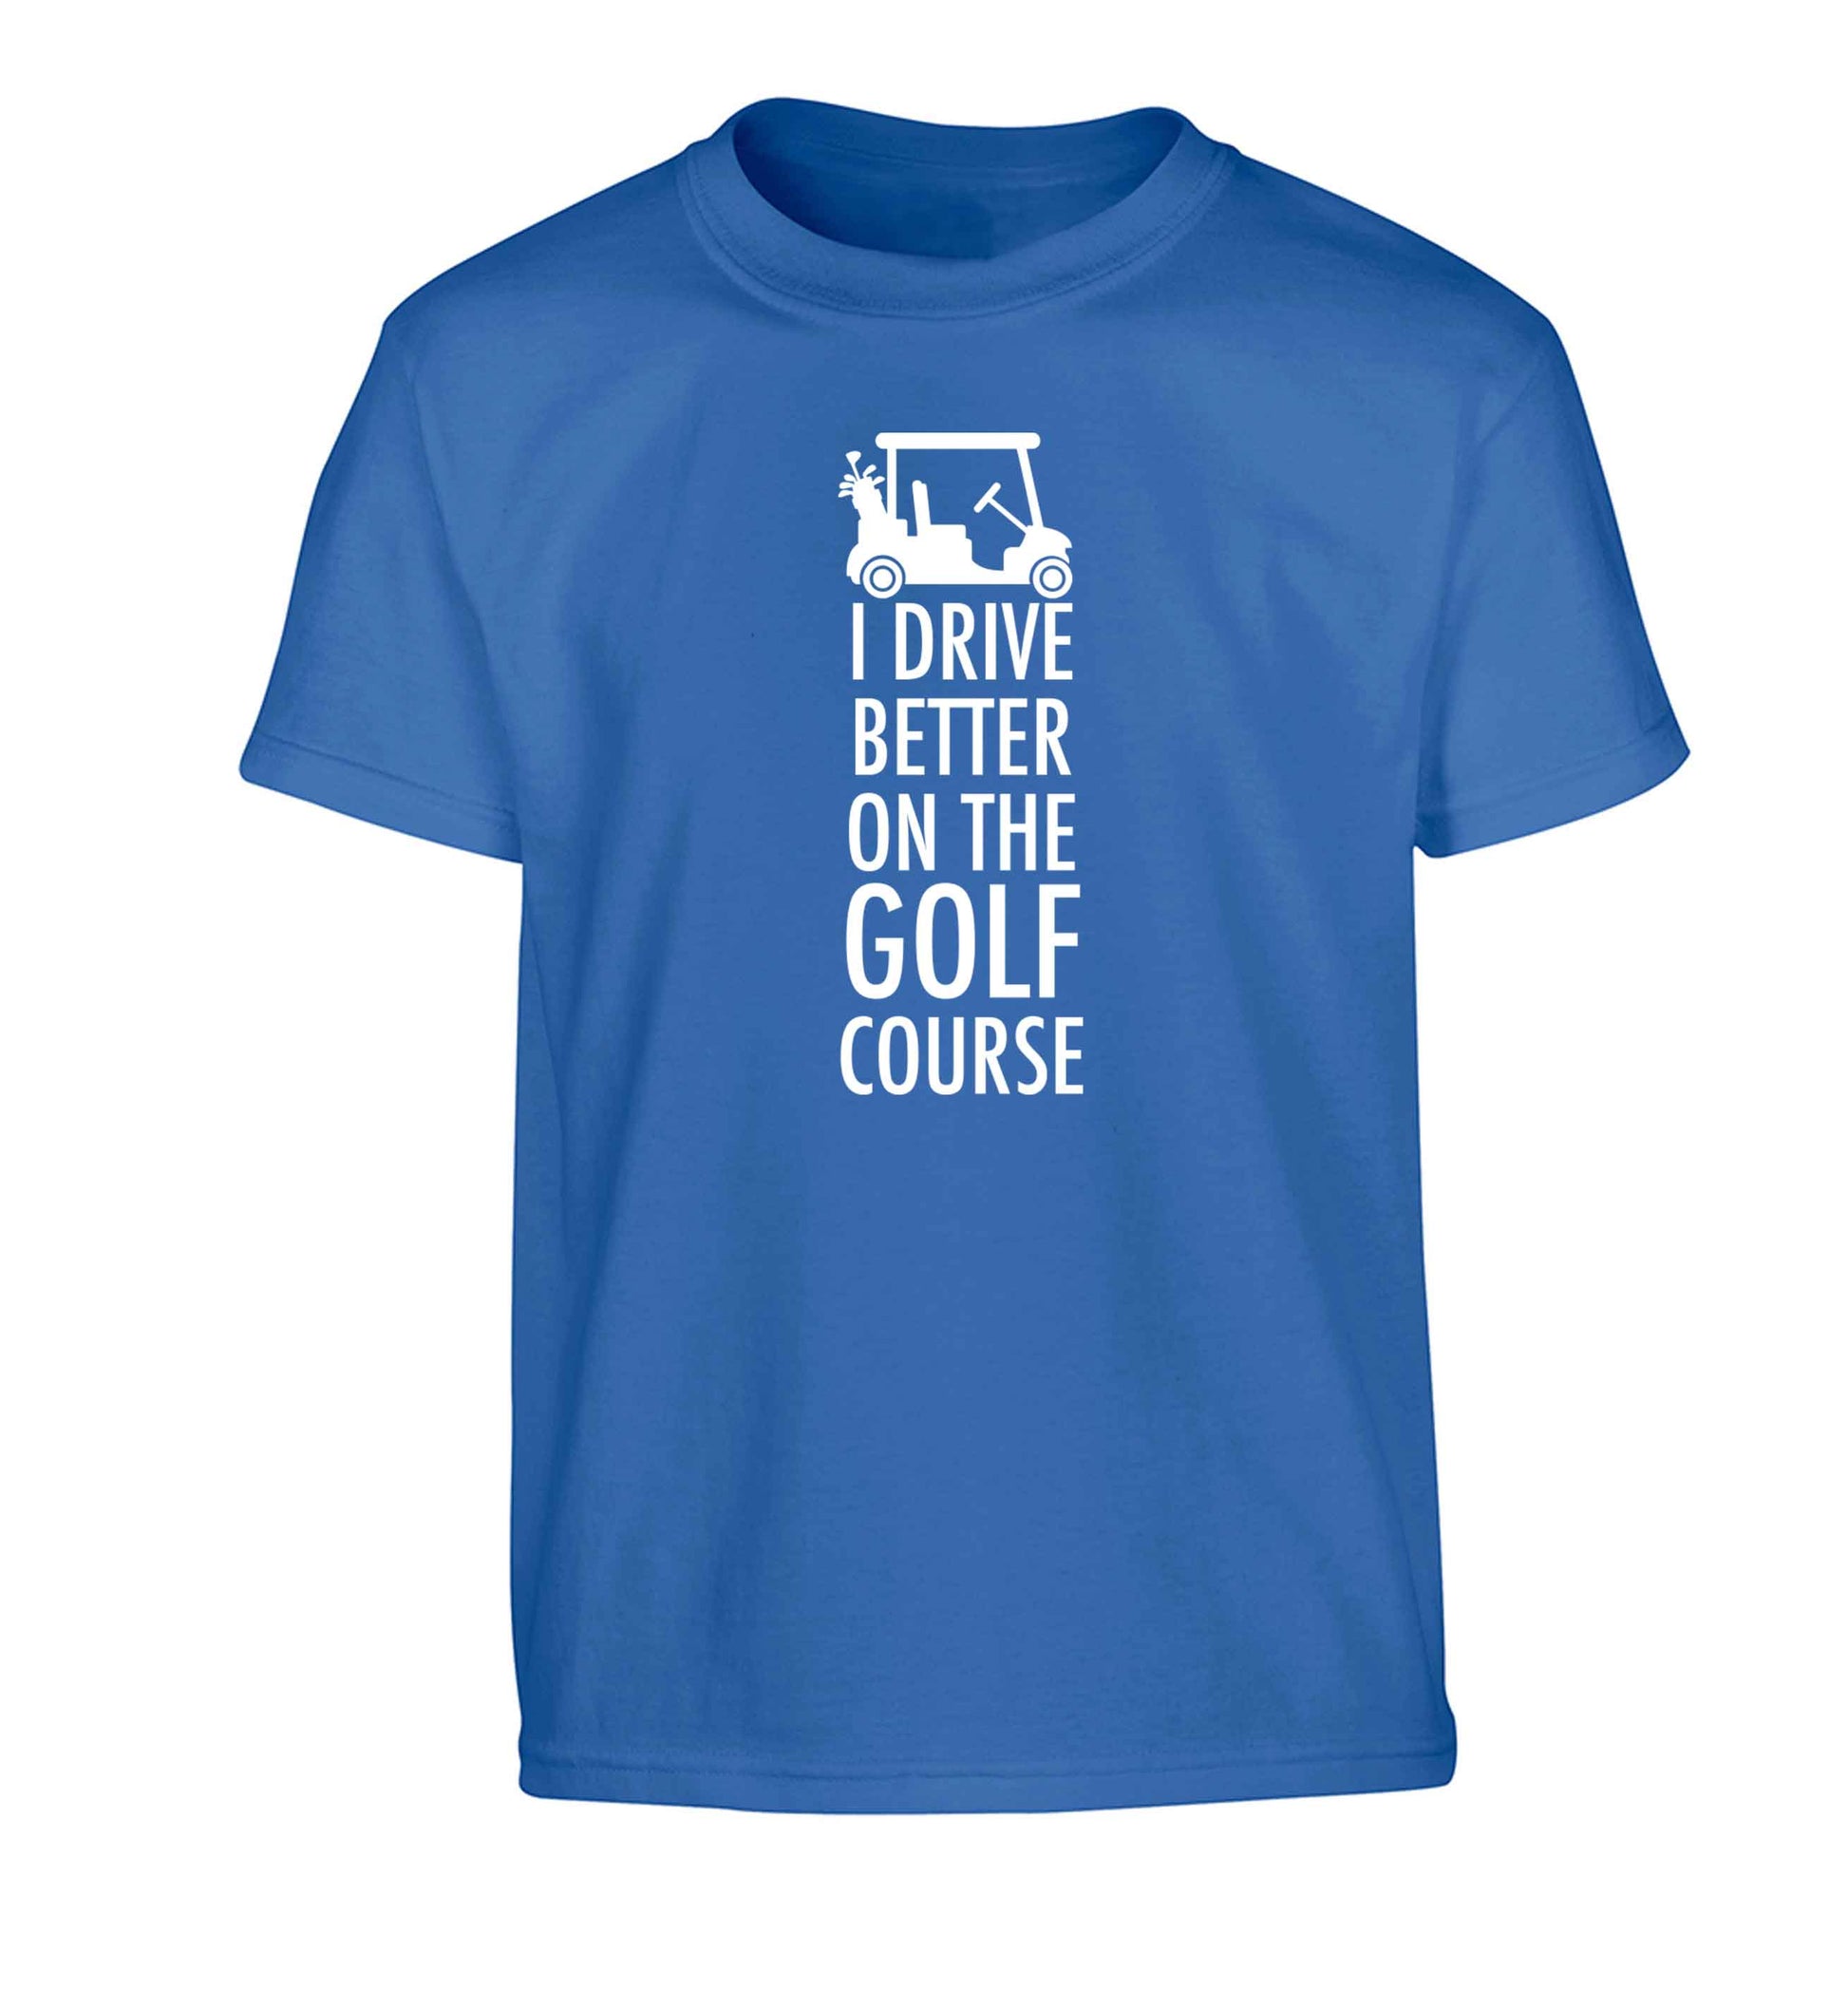 I drive better on the golf course Children's blue Tshirt 12-13 Years